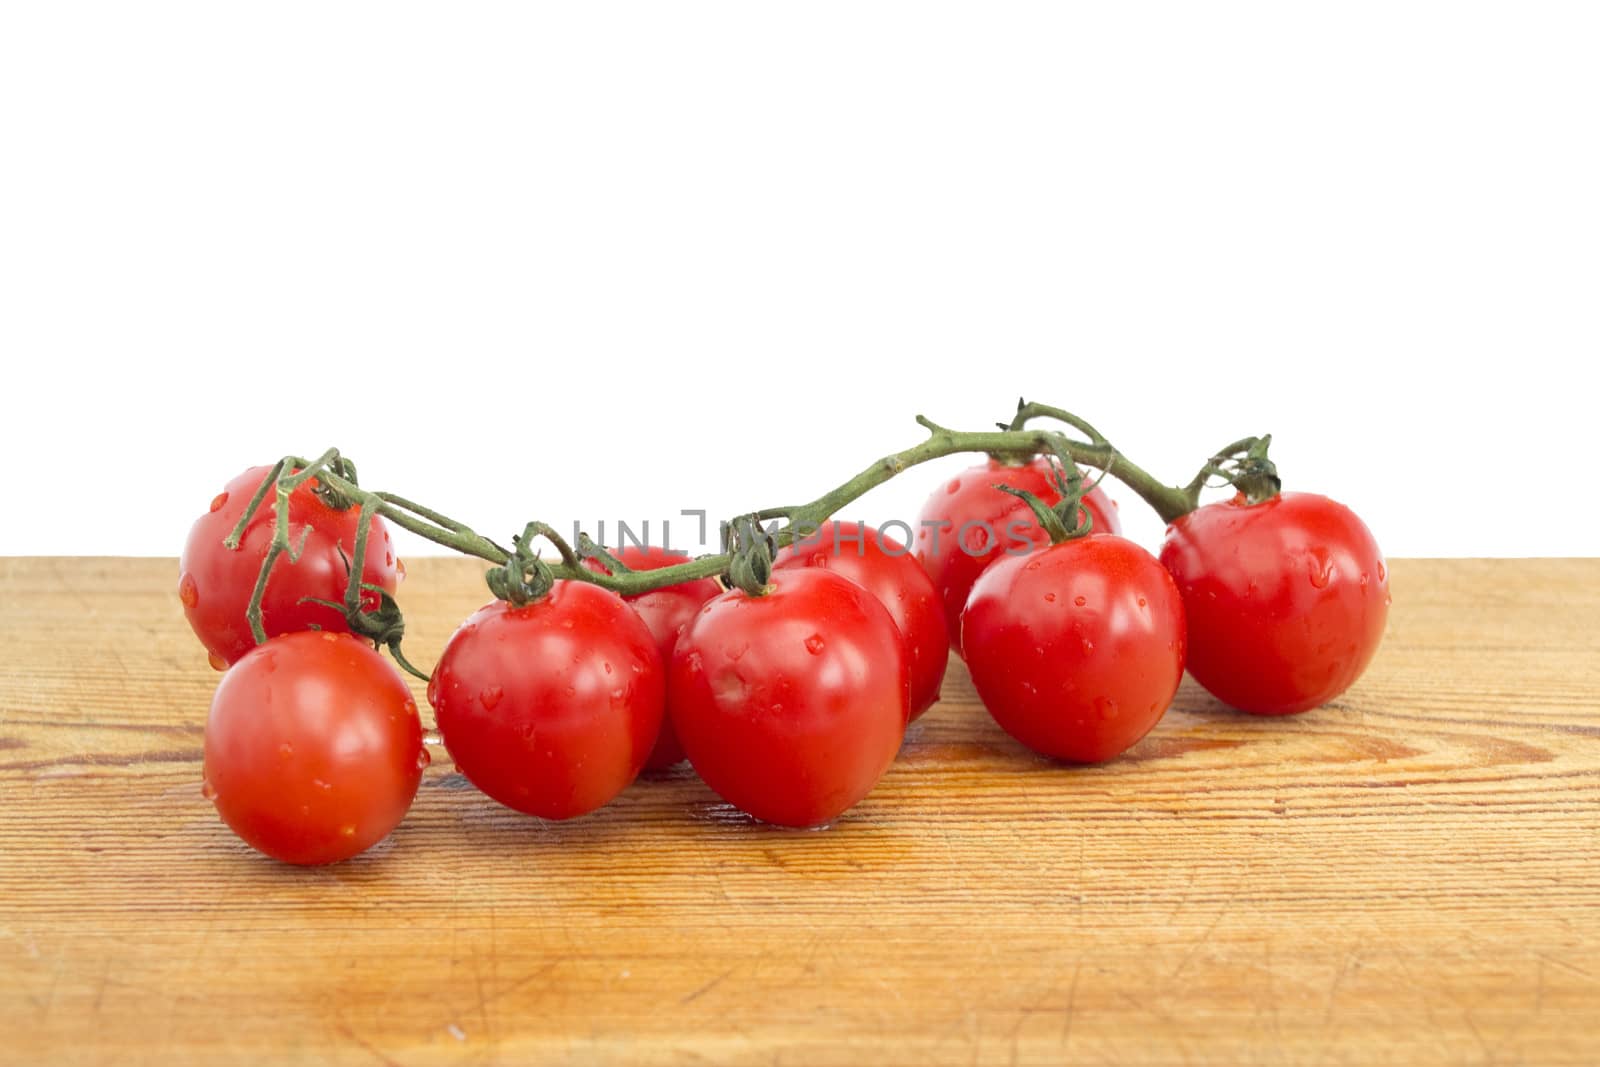 Vine of tomatoes on a wooden board